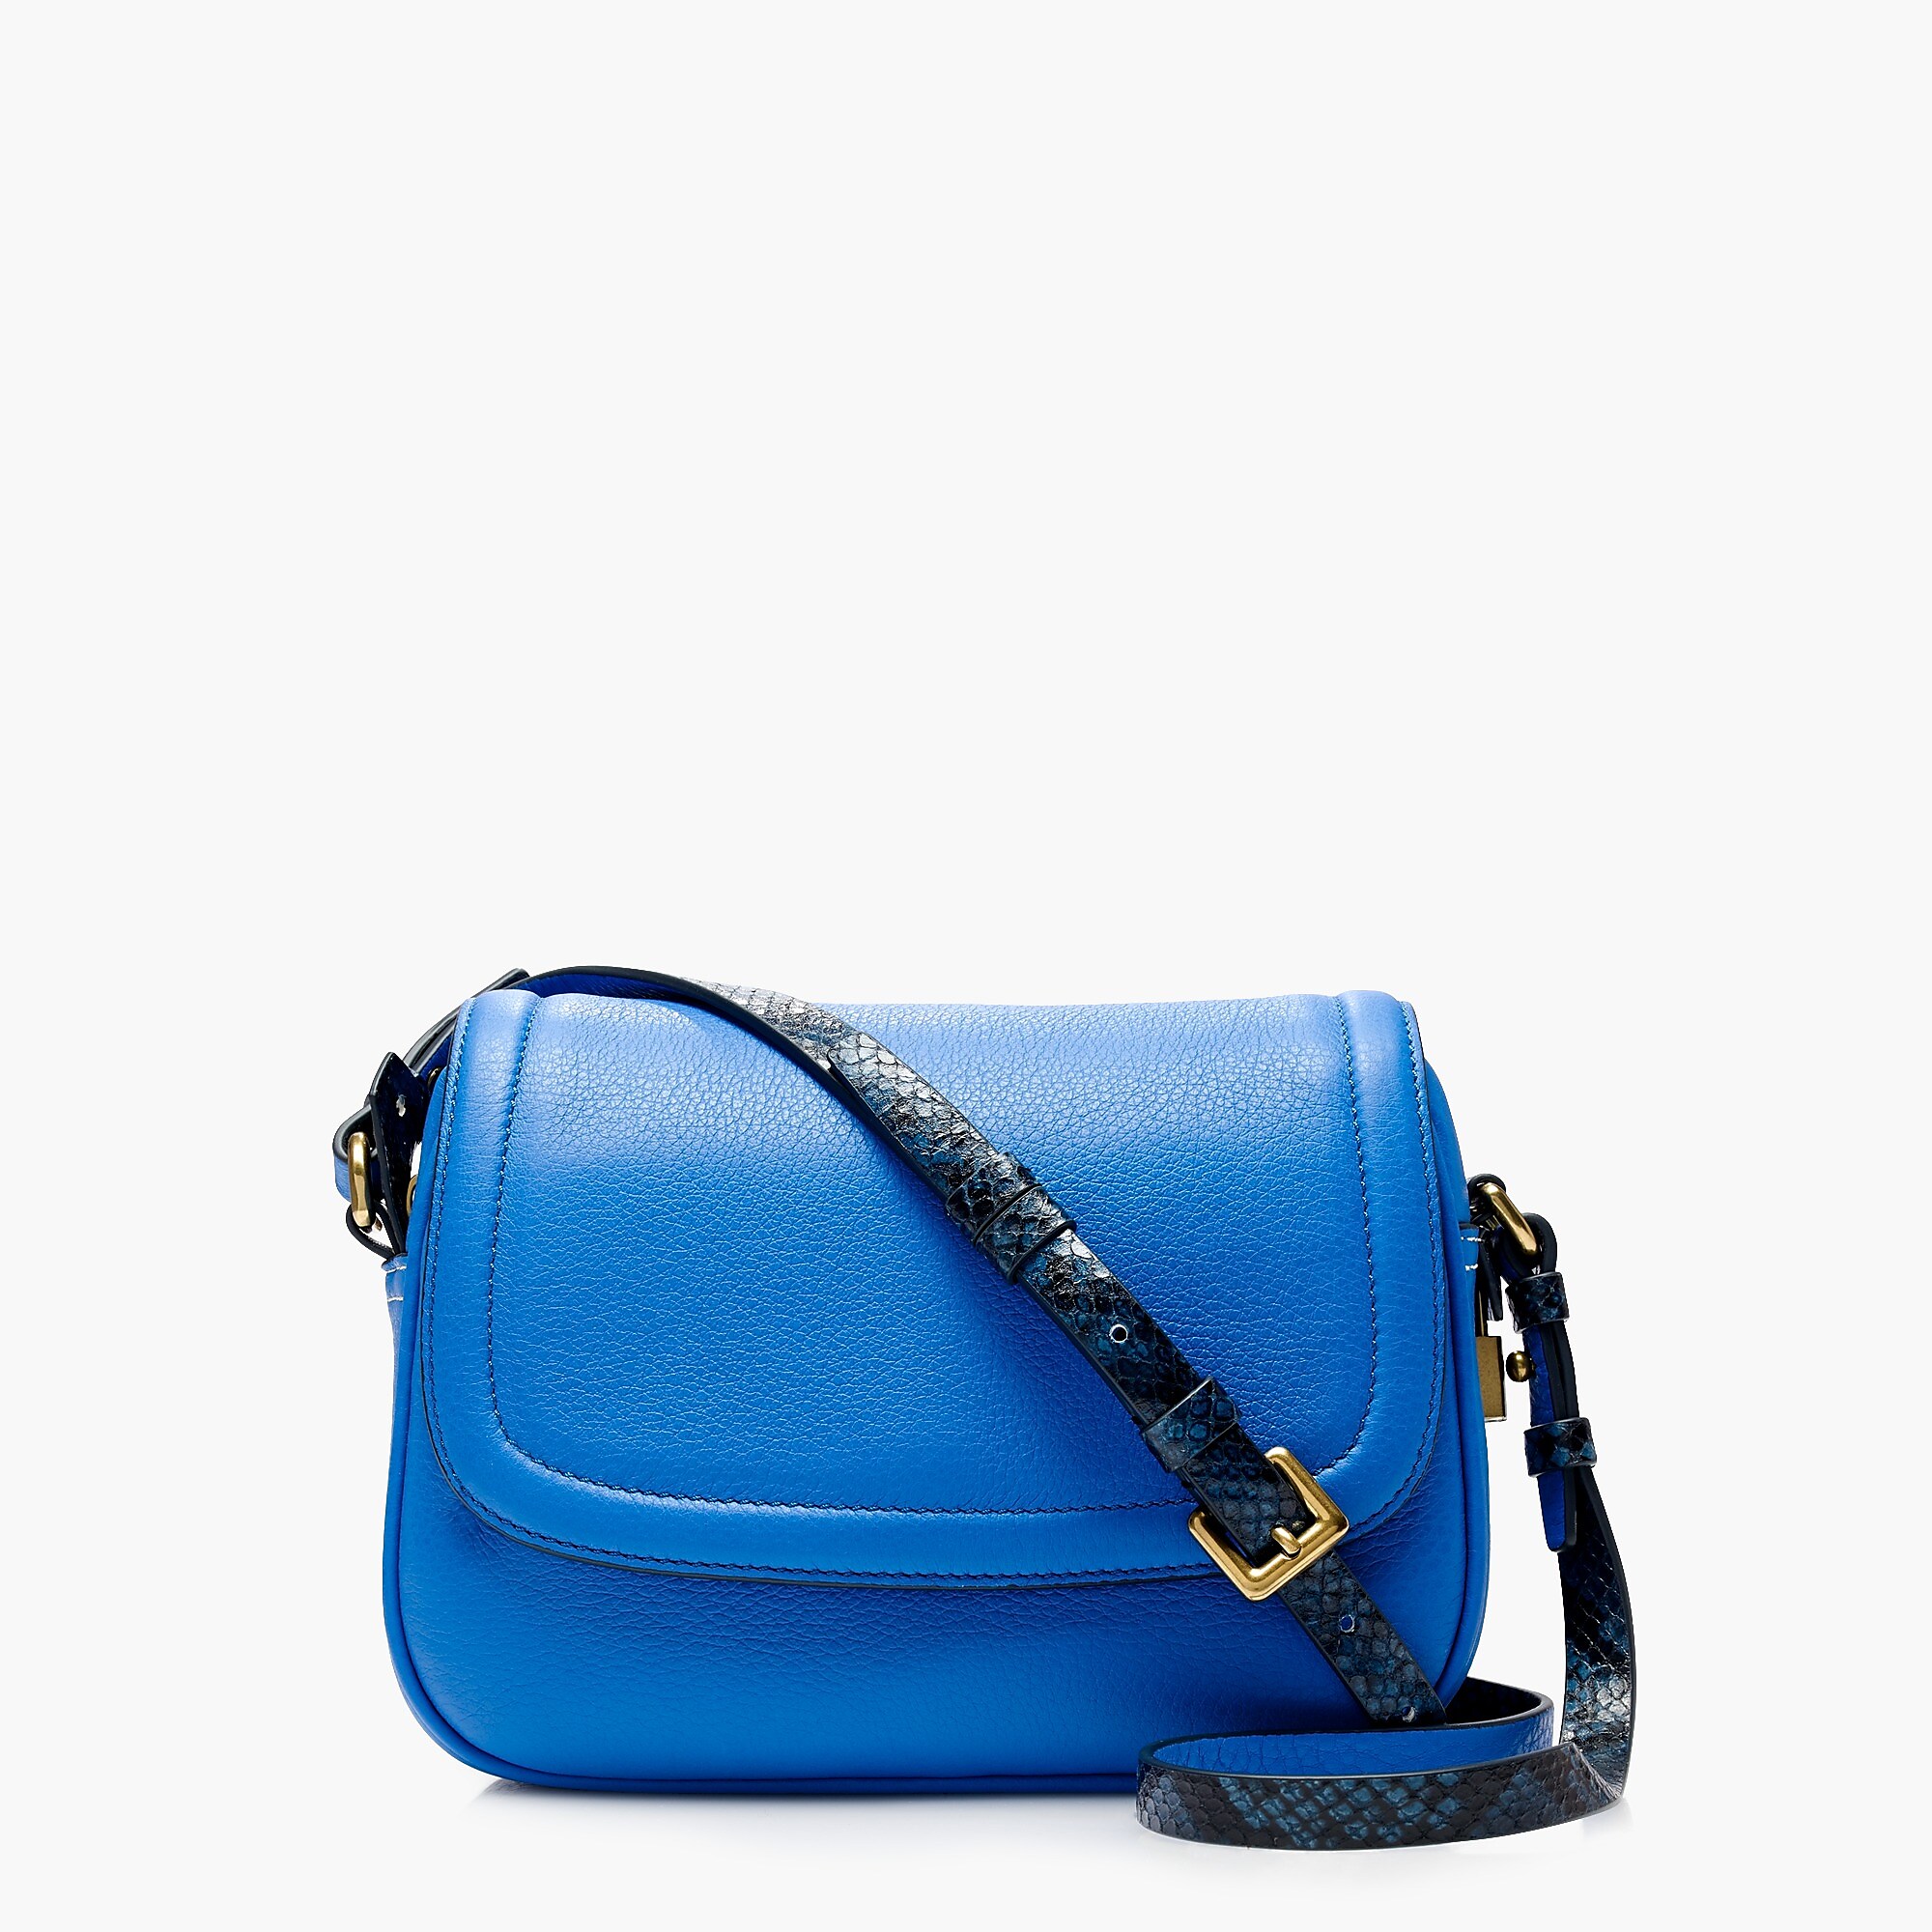 Signet flap bag with printed strap in Italian leather : Women bags | J.Crew